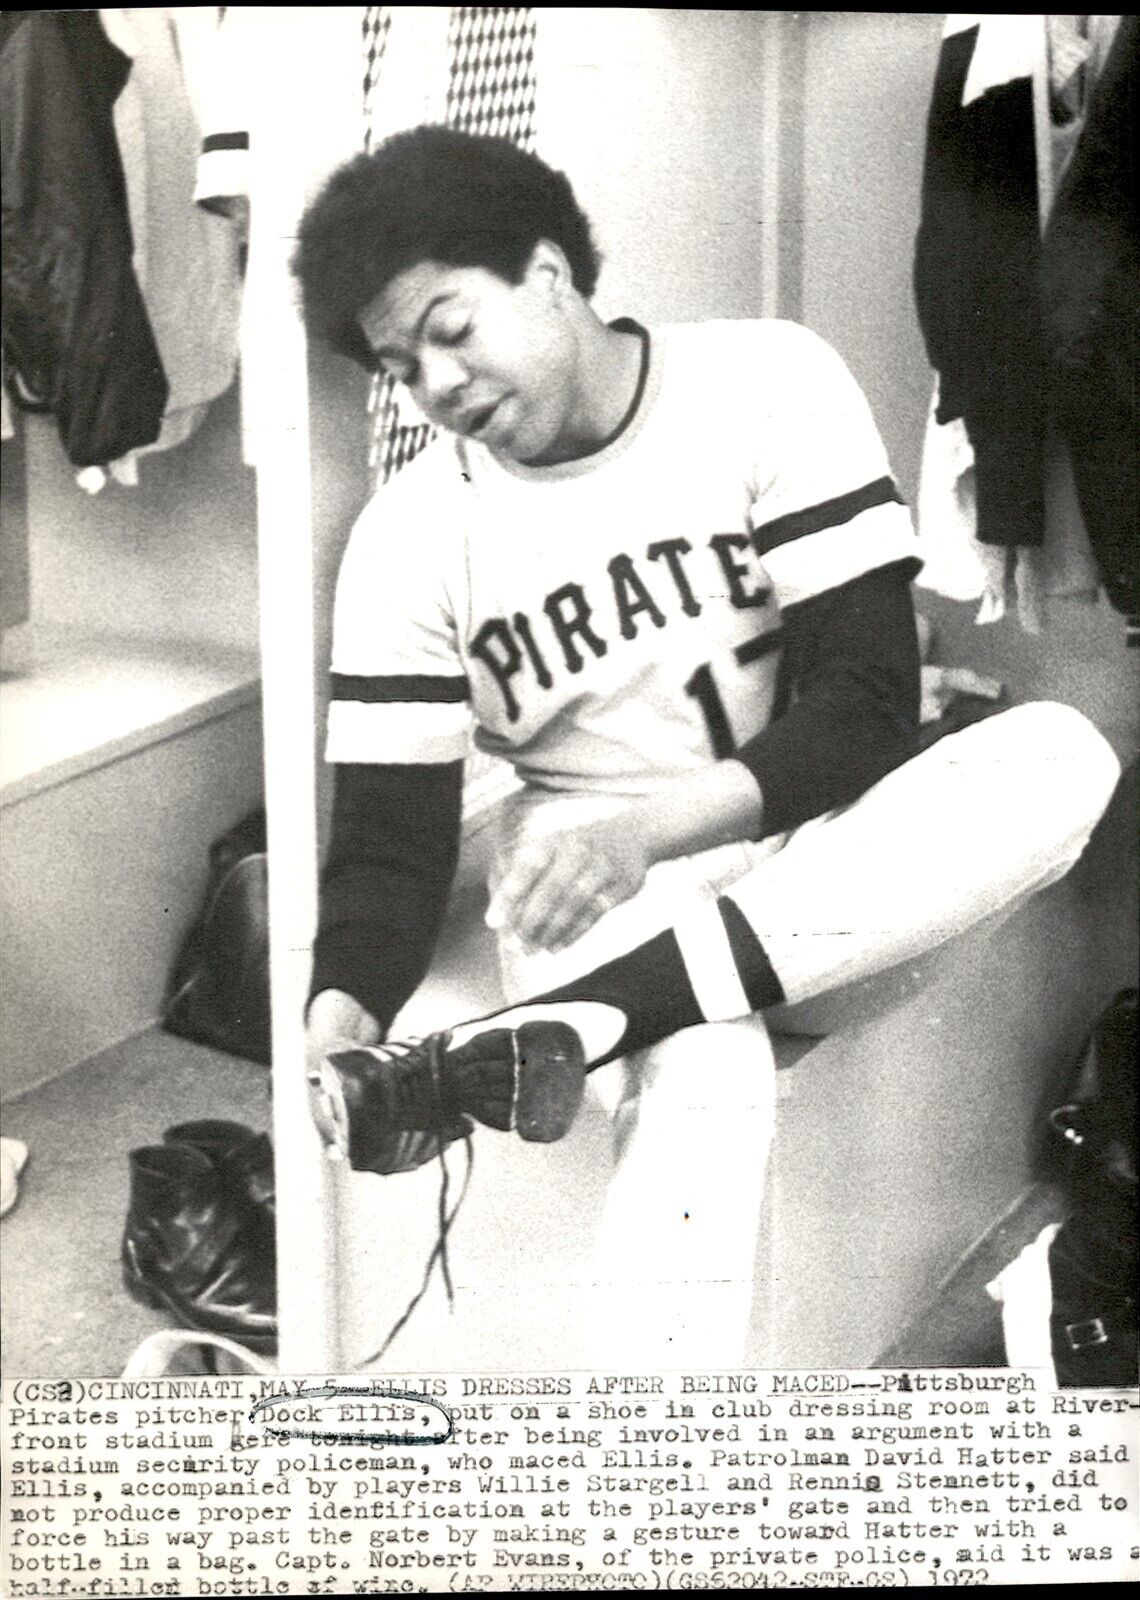 LG968 1972 AP Wire Photo DOCK ELLIS DRESSES AFTER BEING MACED PITTSBURGH PIRATES